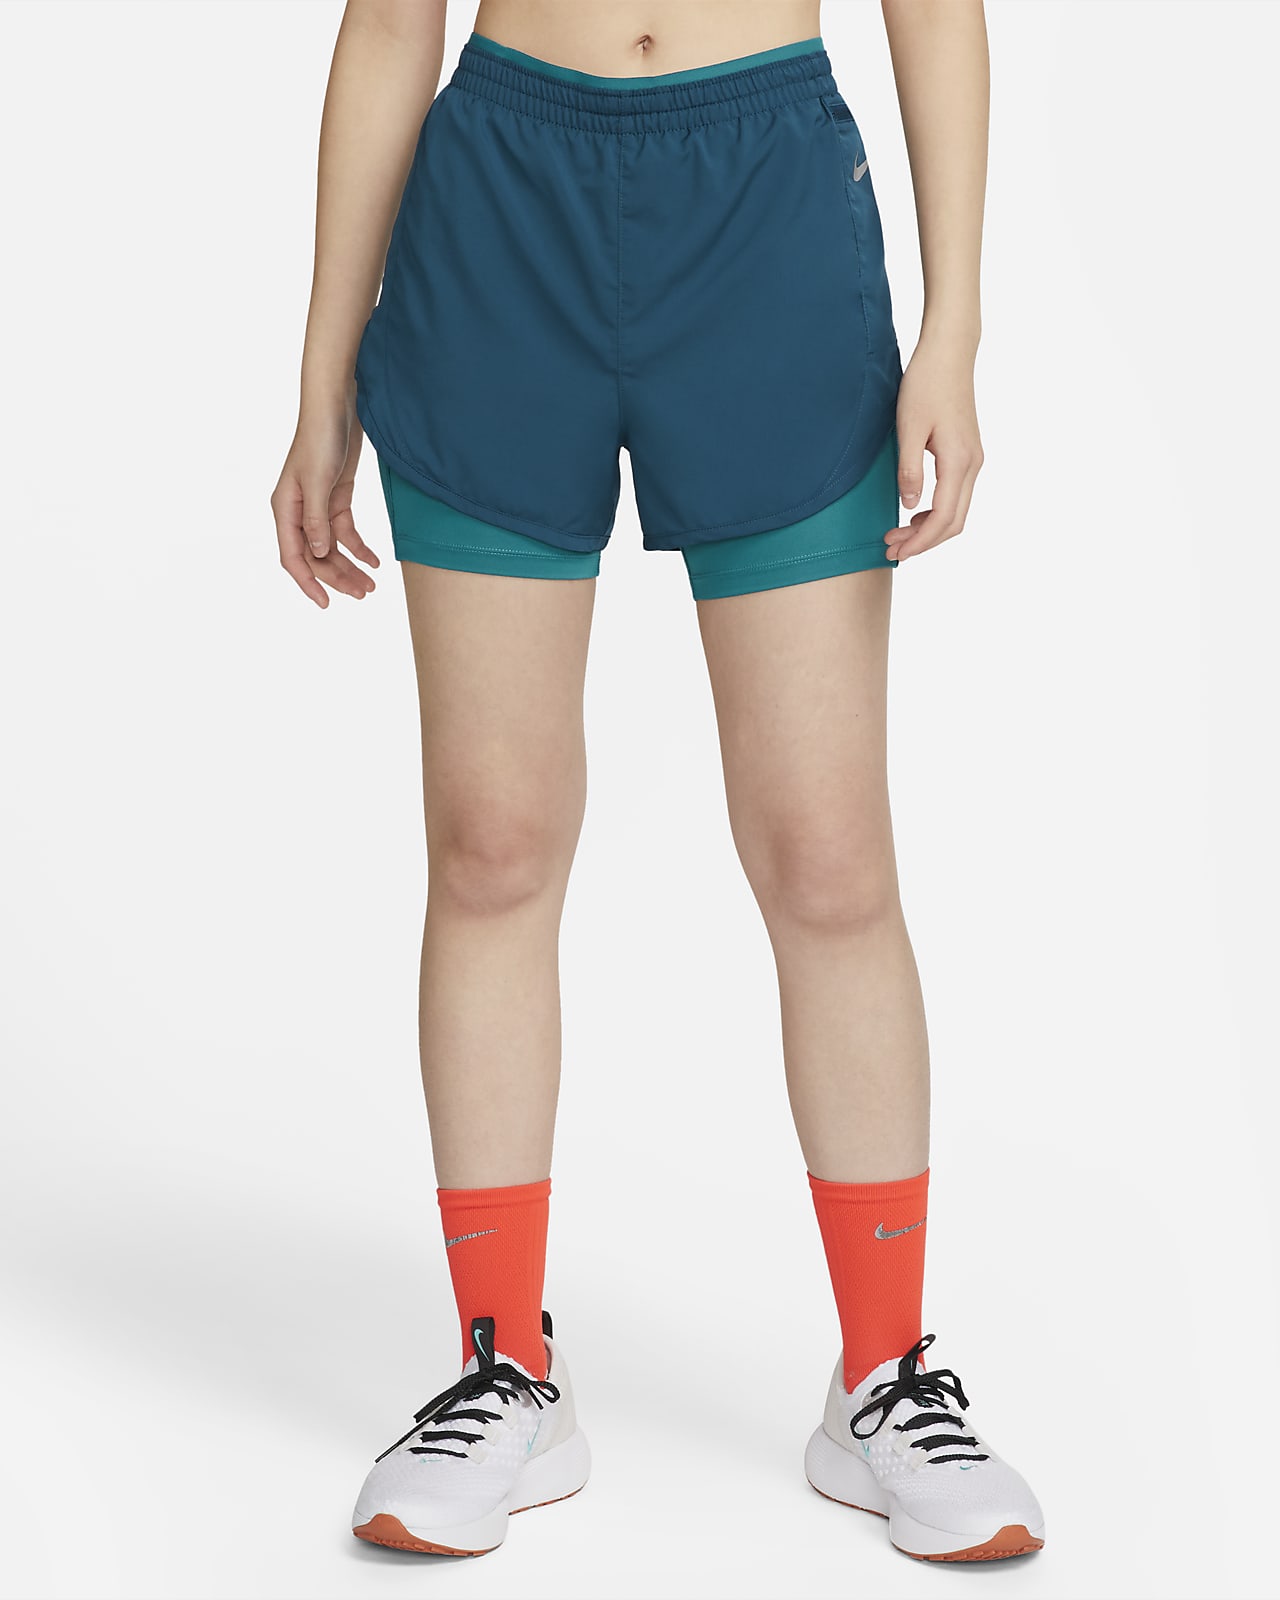 Nike Tempo Luxe Women's 2-In-1 Running Shorts